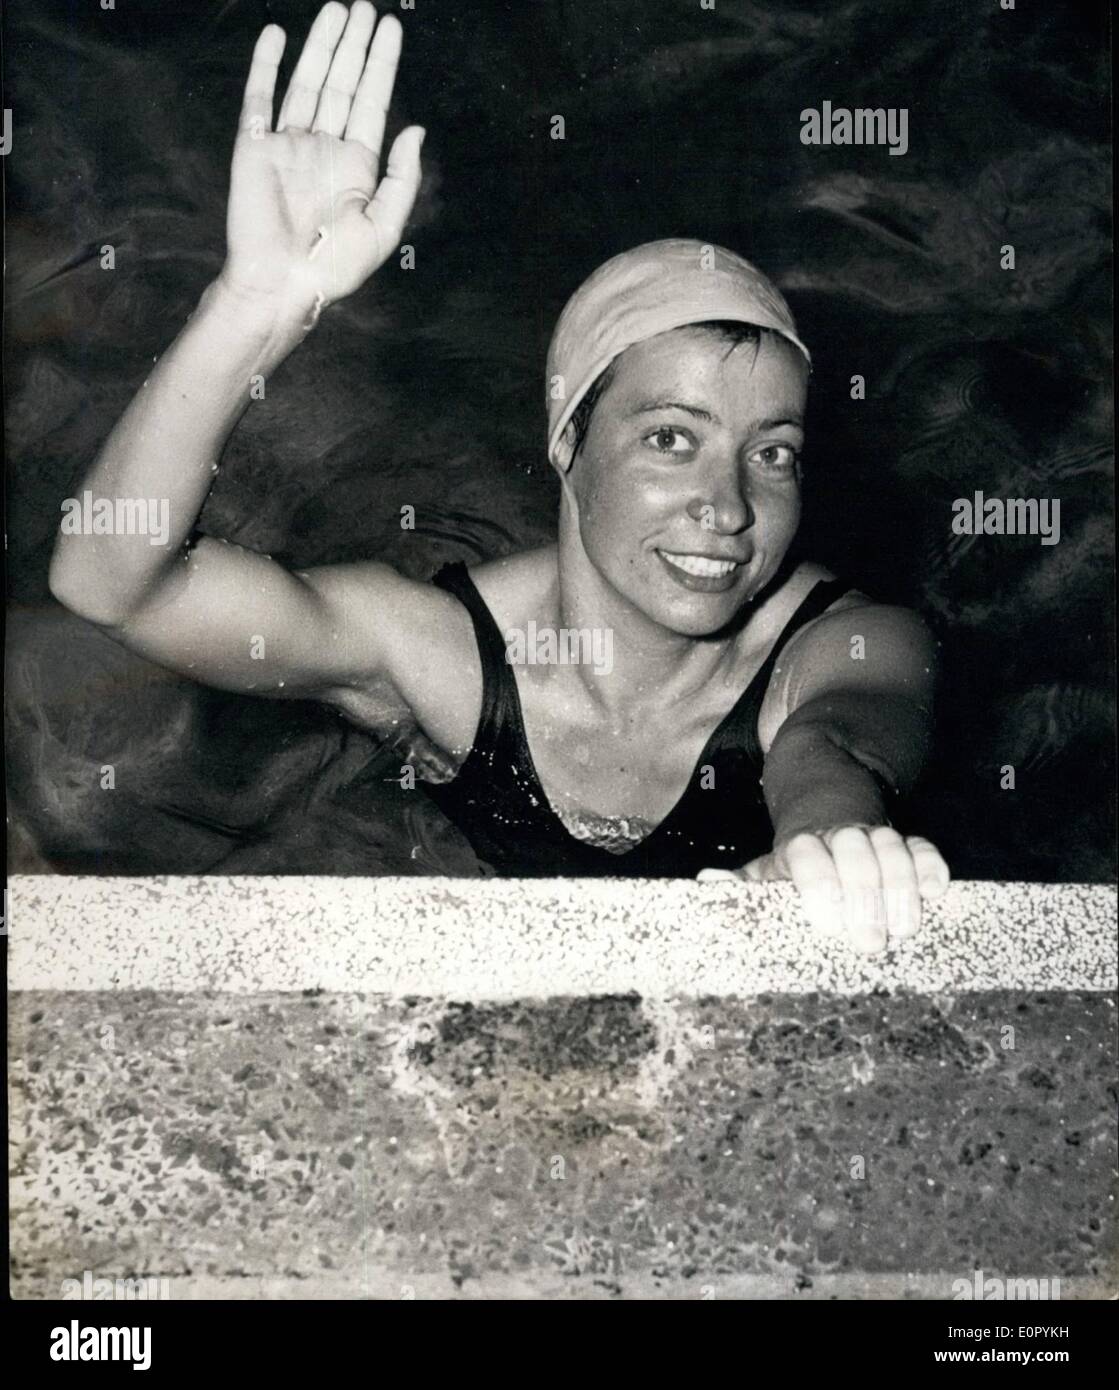 Jul. 07, 1957 - Thomas set a new record for the 1,500 meter freestyle swim. Her time was 3 seconds better than Ginette Jan's, who held the previous record. She also improved her own record in the 800 meter race. She is pictured right after her victory at the side of the Stock Photo